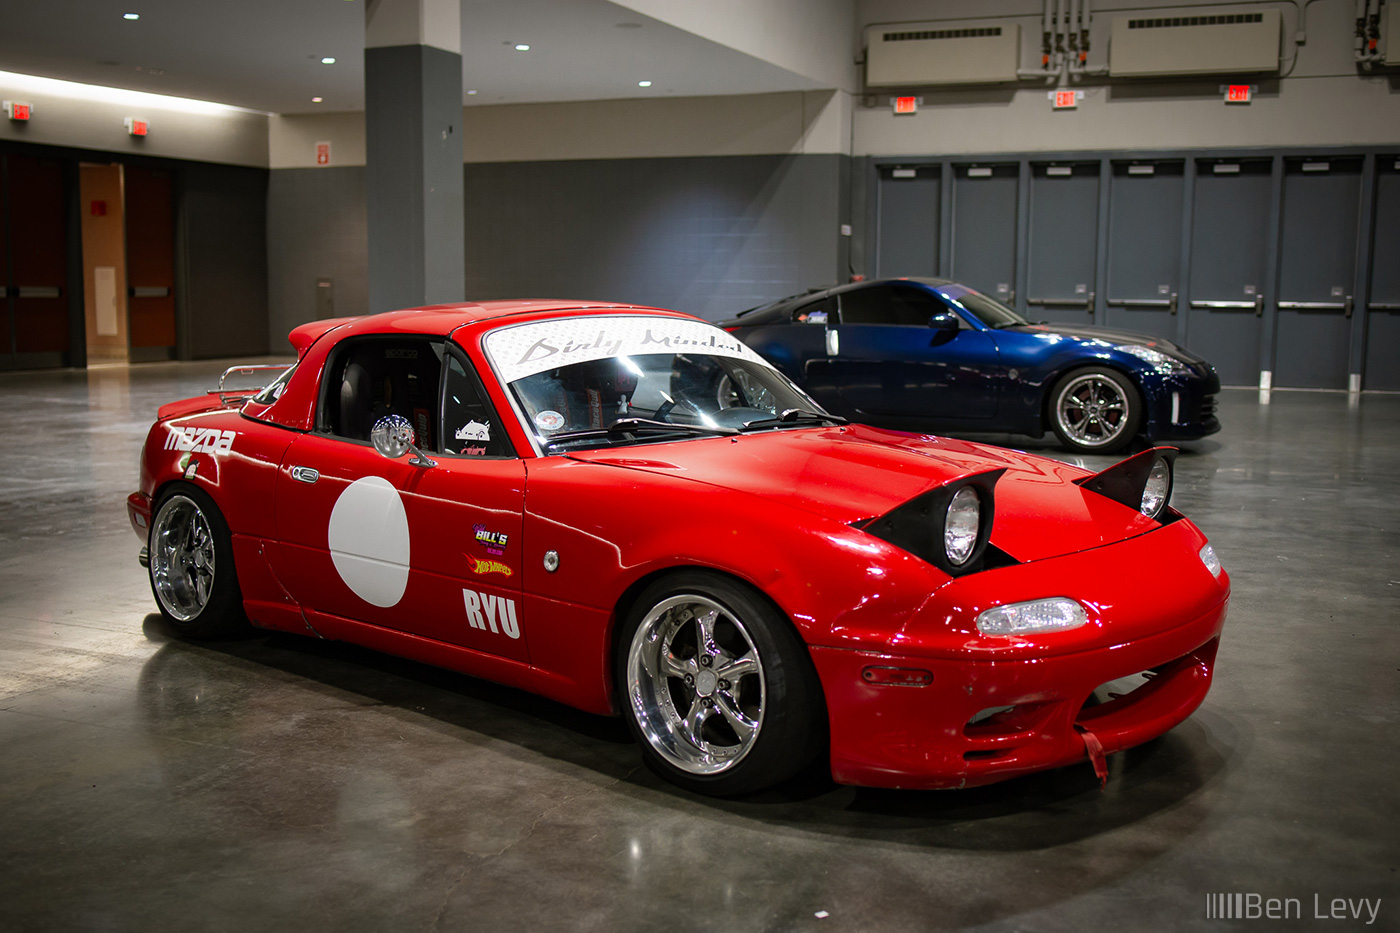 Red Mazda Miata from Dirty Minded Crew